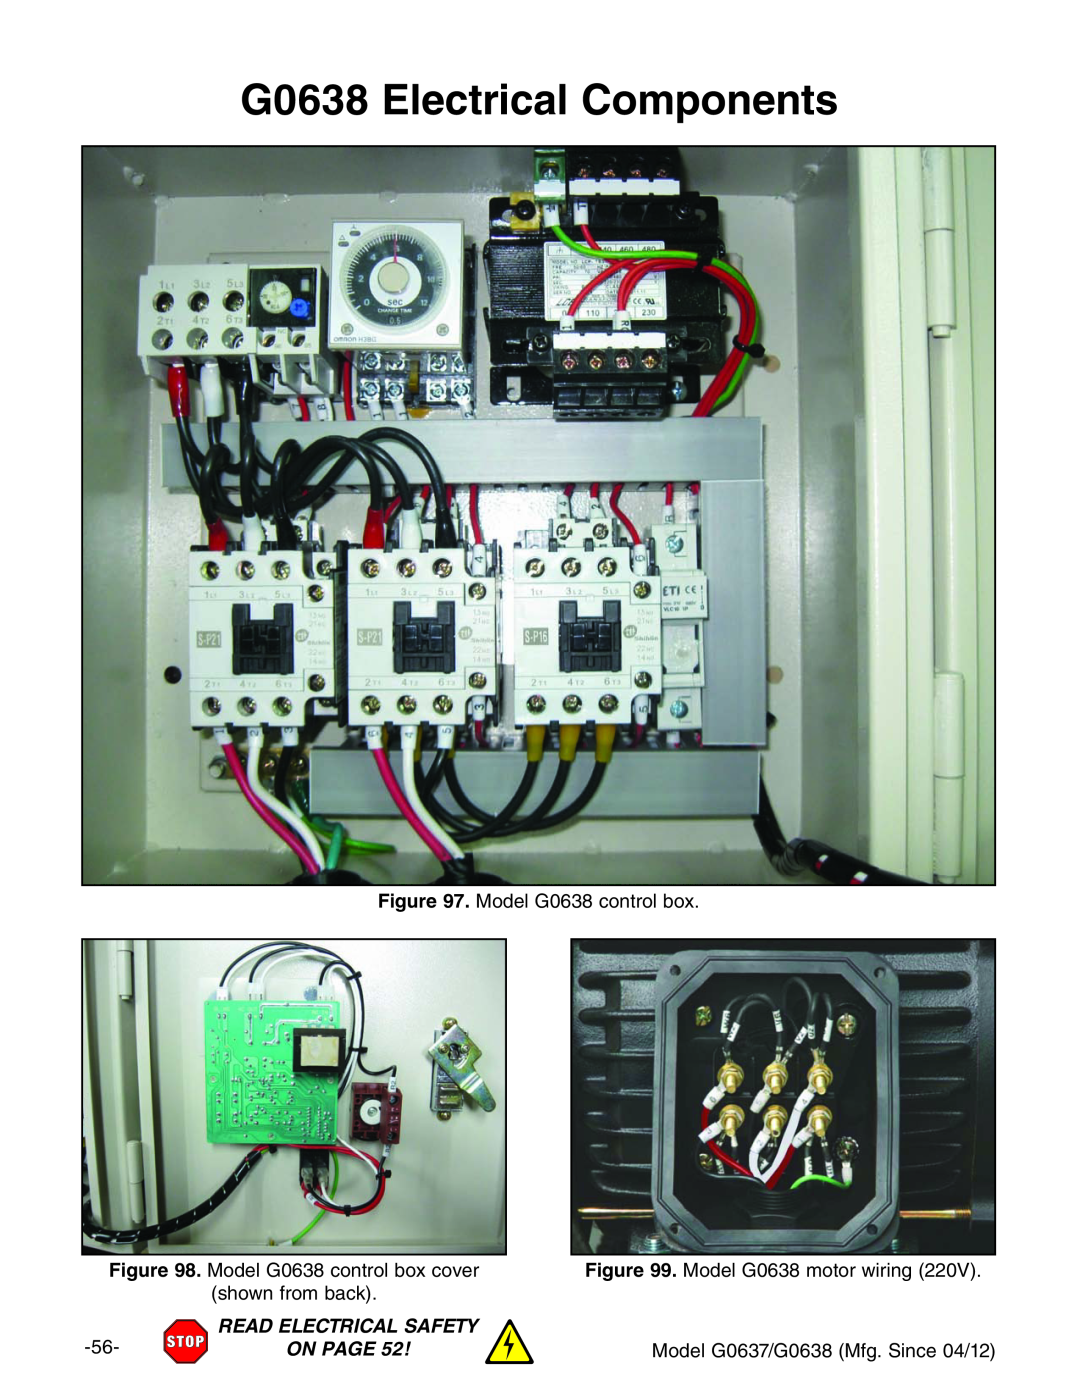 Grizzly G0637 owner manual G0638 Electrical Components, BdYZa %+-XdcigdaWdm#, Read Electrical Safety, On Page 